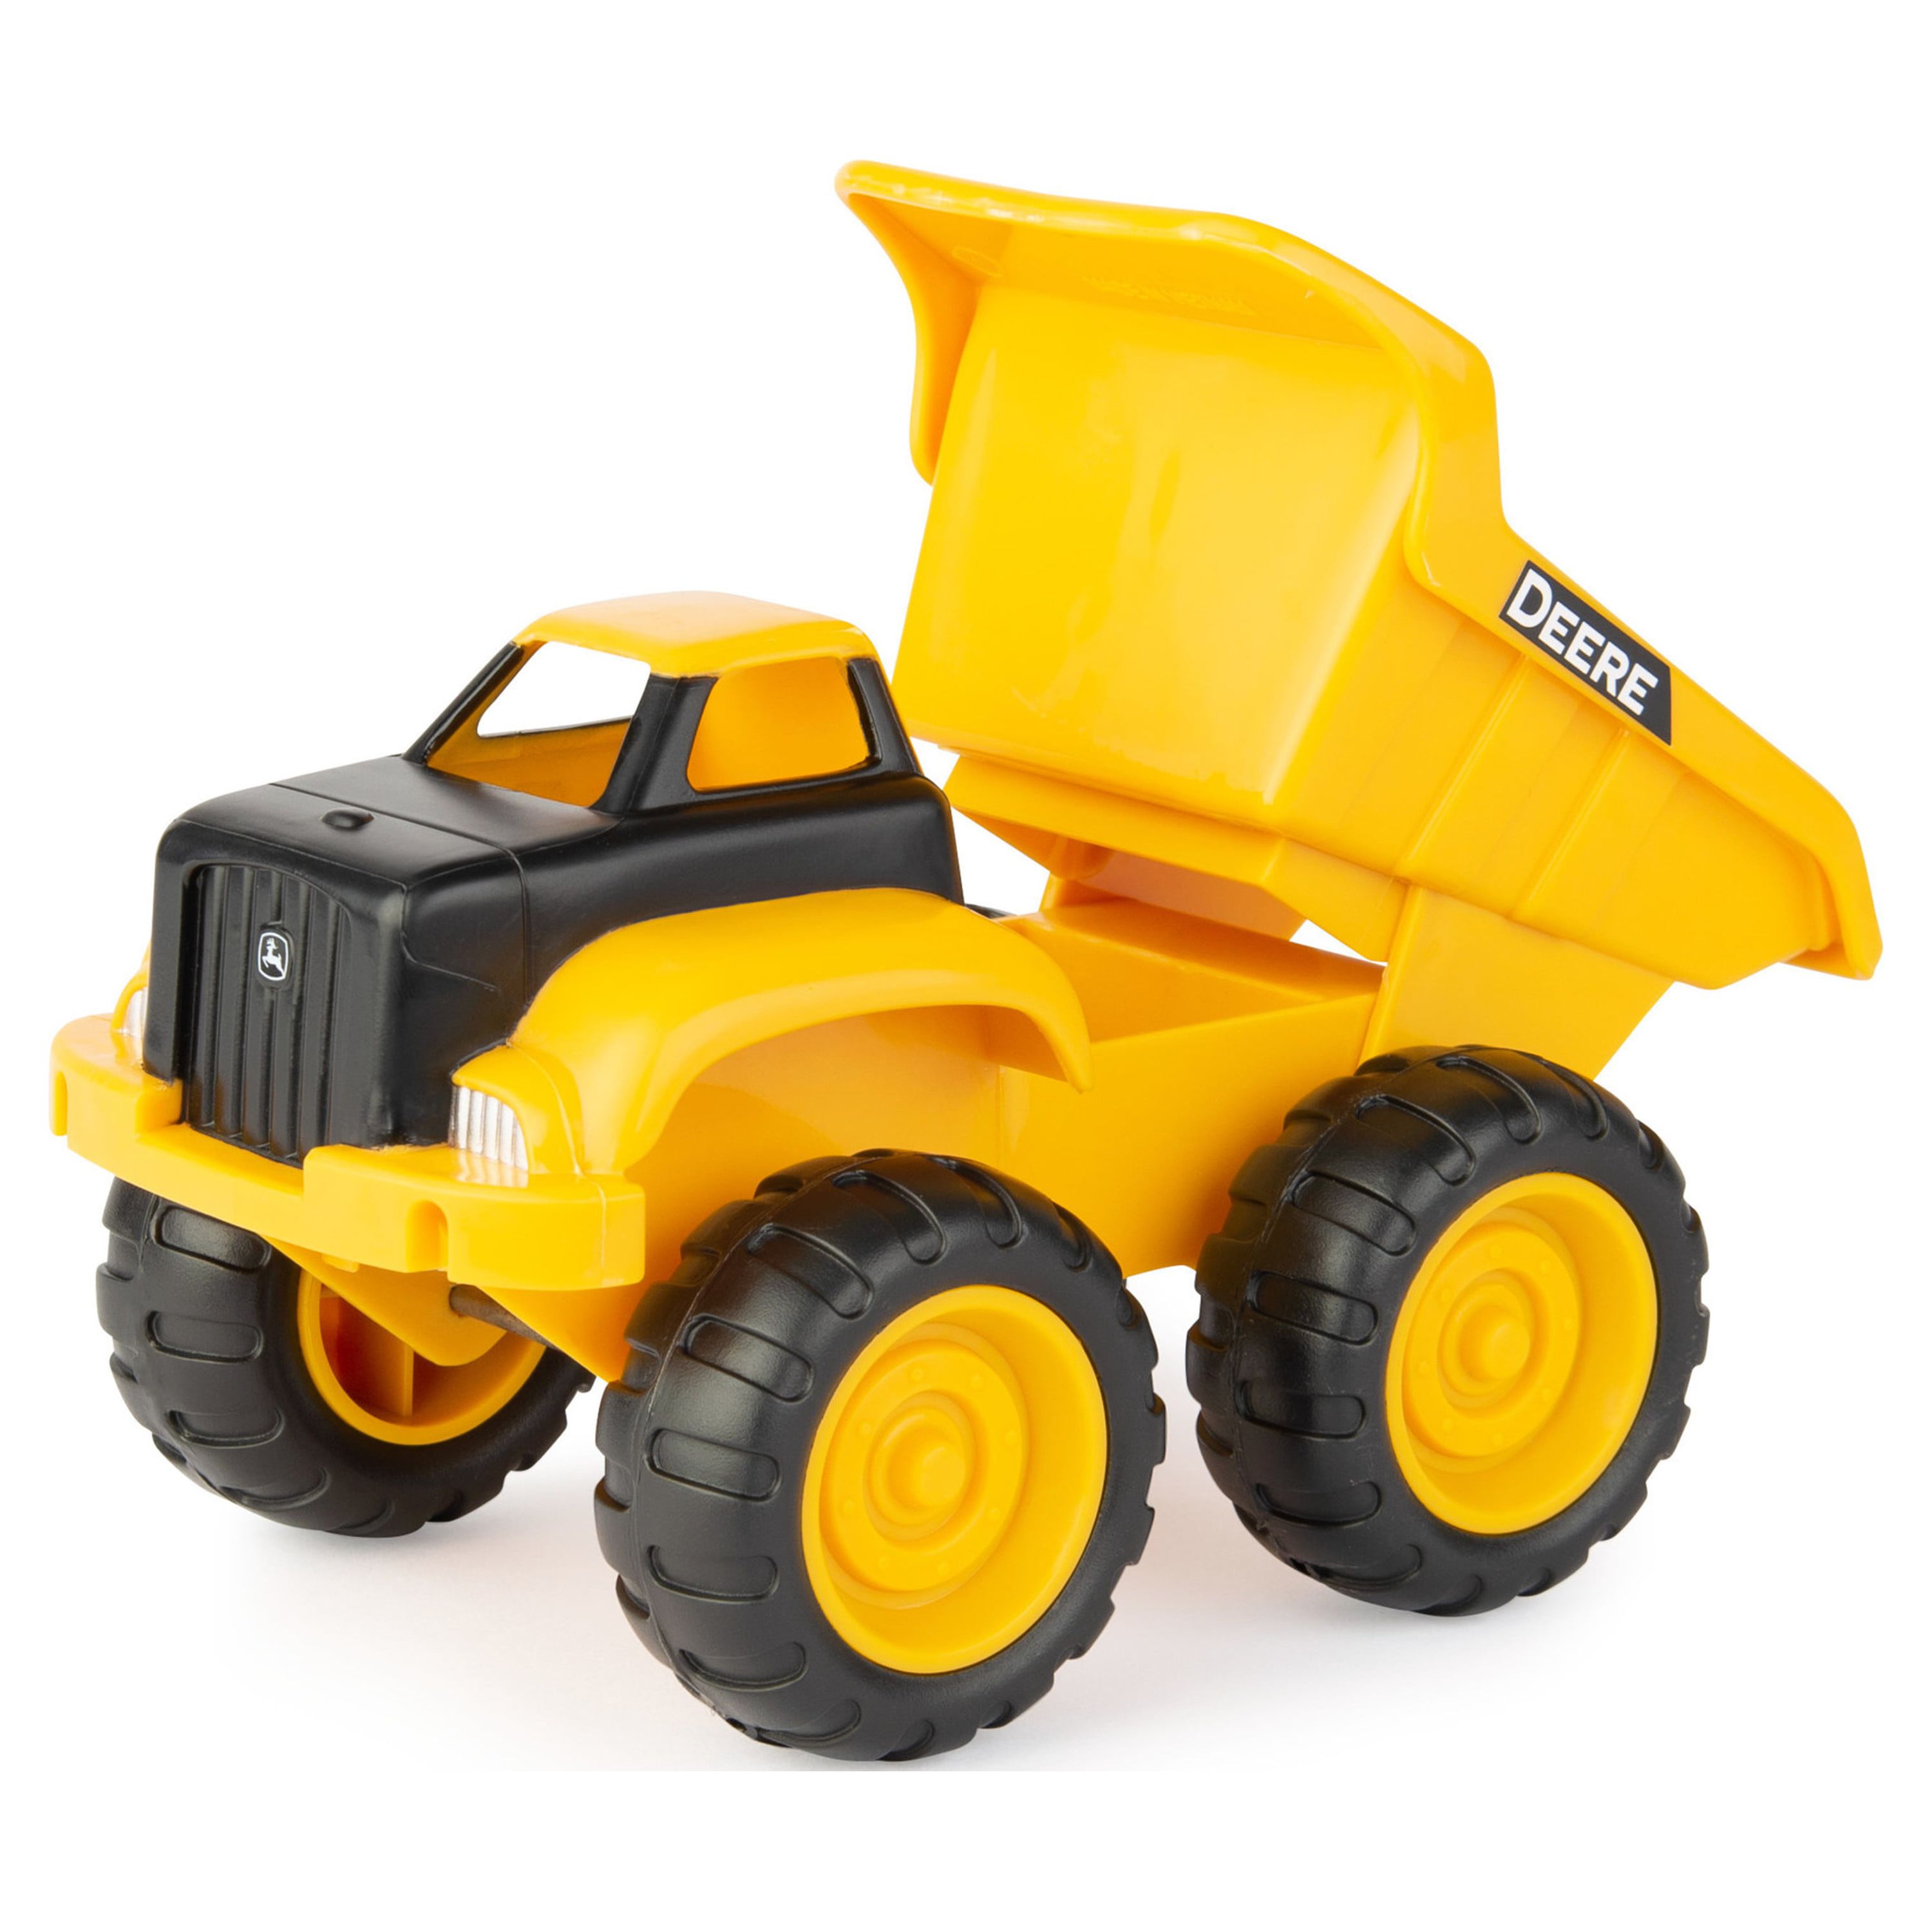 John Deere Sandbox 6" Construction Vehicle 2 Pack, Dump Truck & Tractor with Loader, Yellow - image 2 of 13